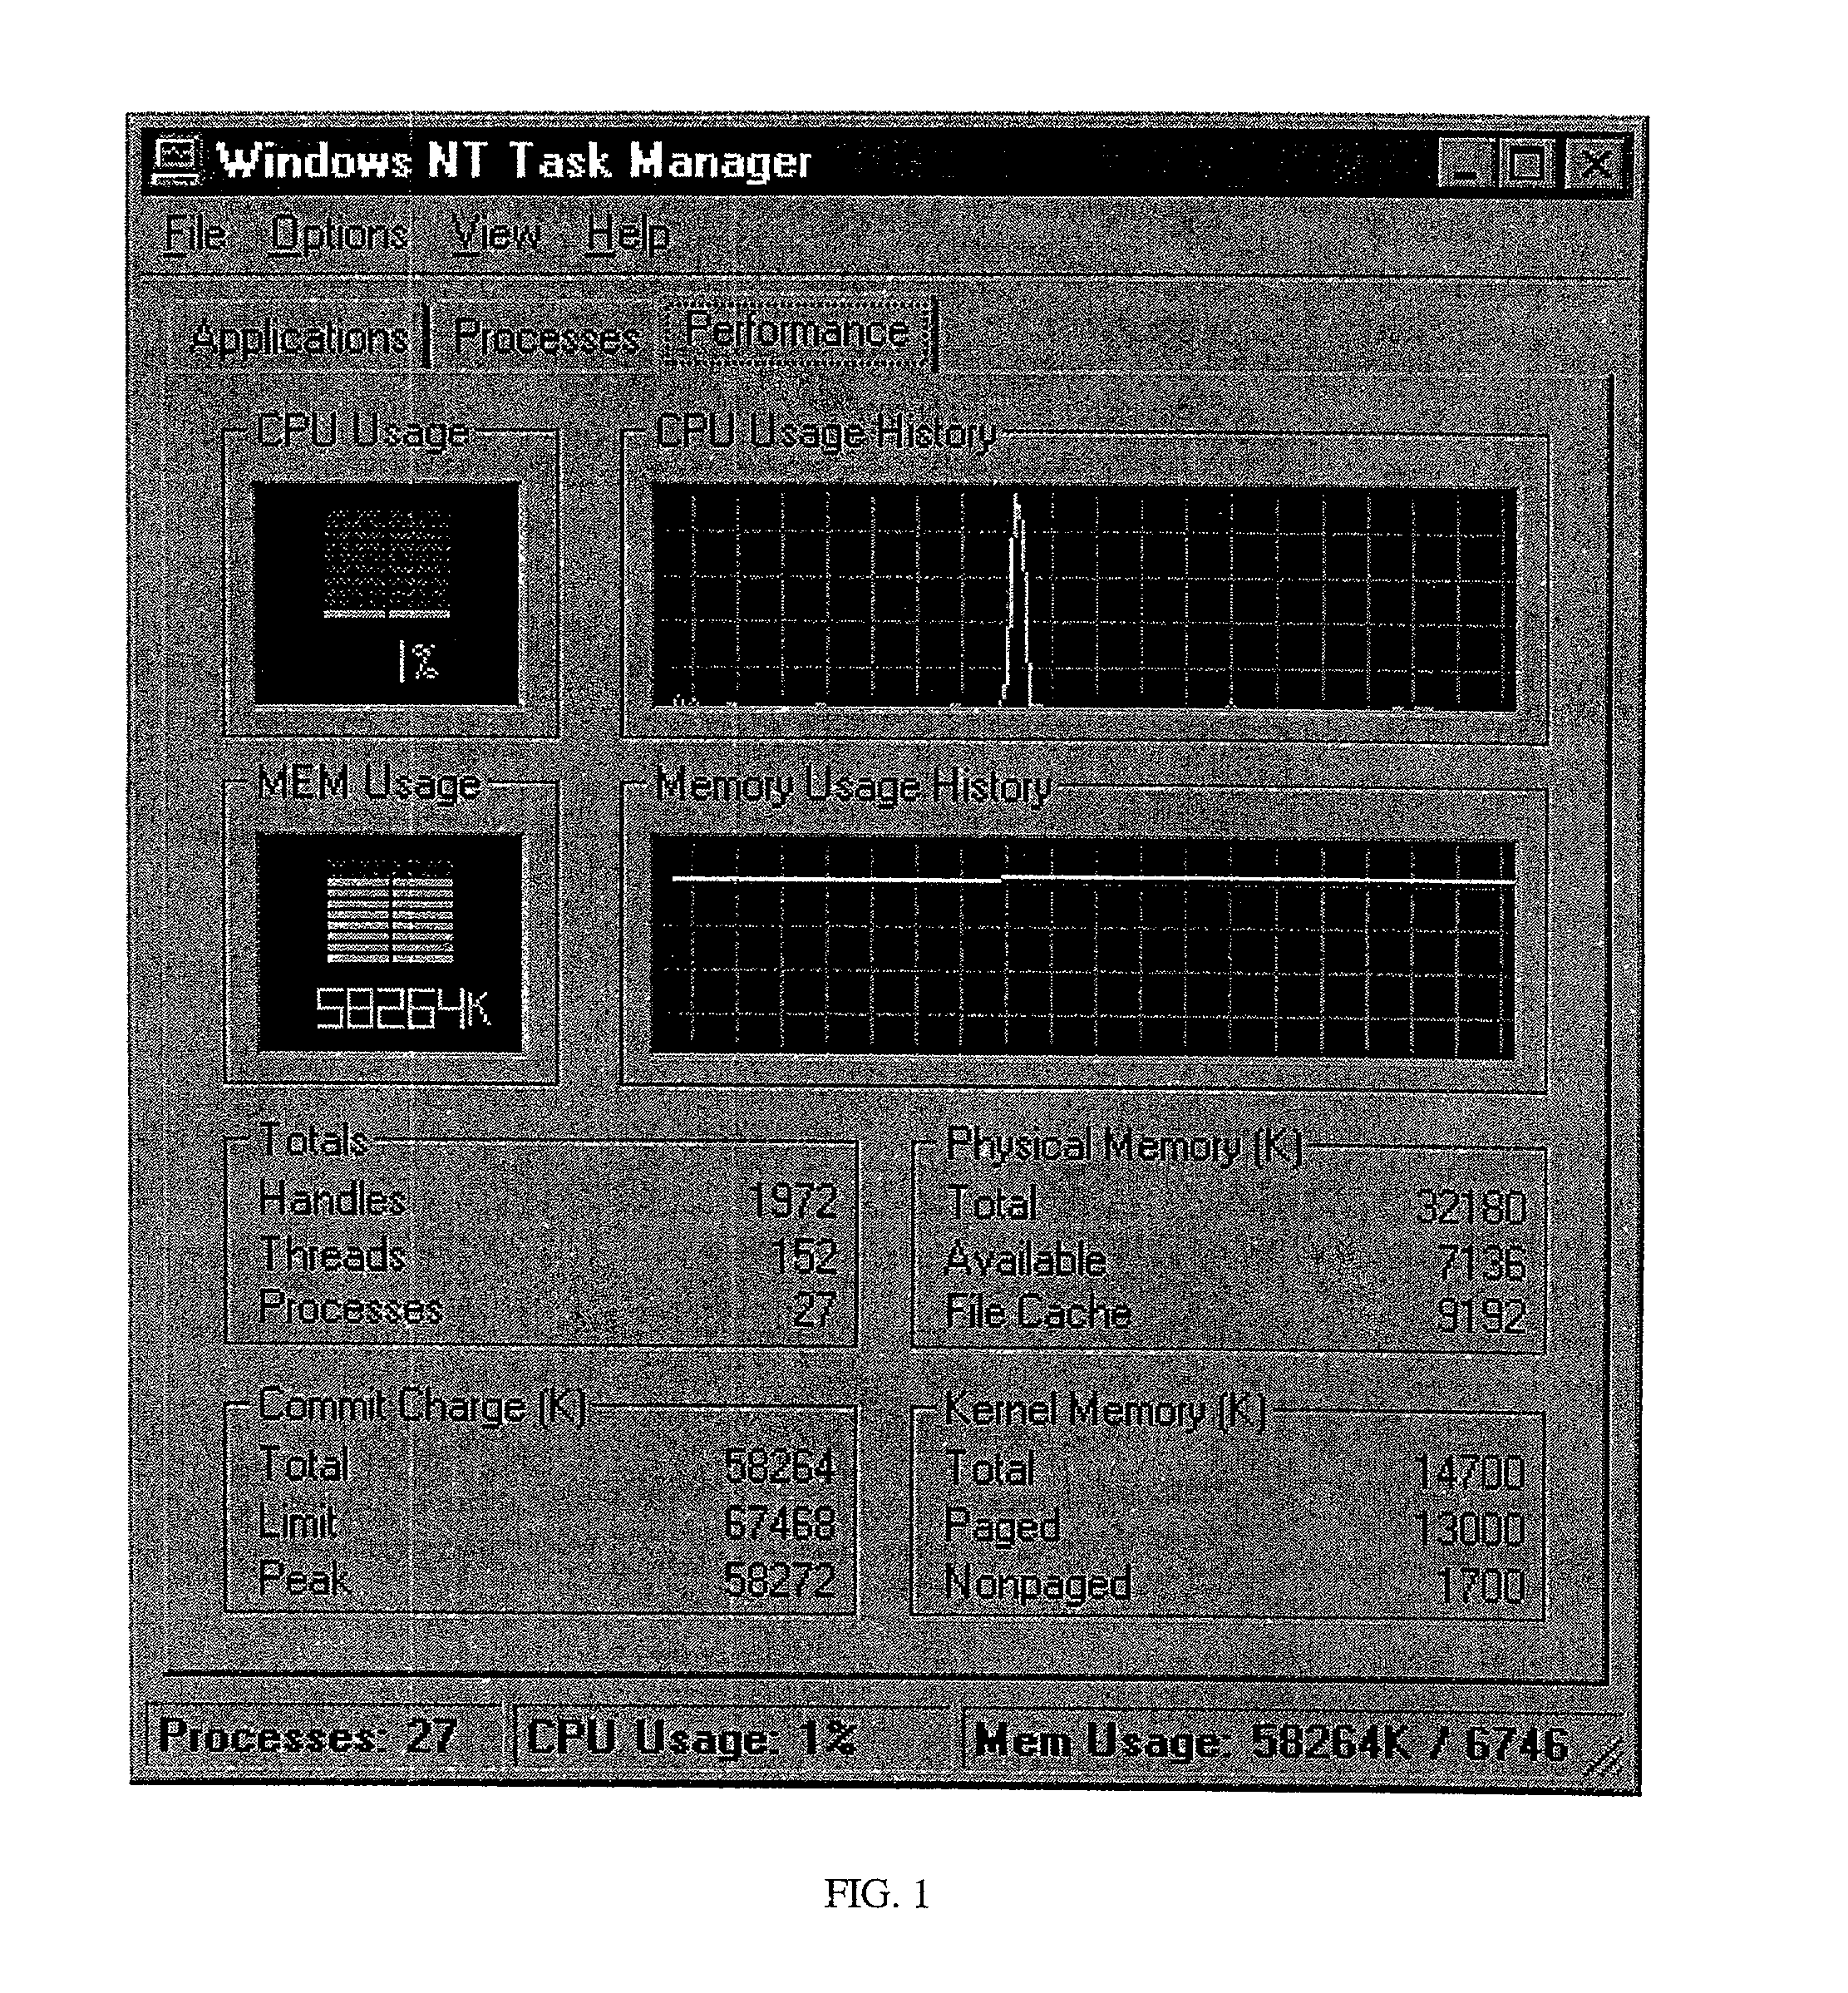 High-precision cognitive performance test battery suitable for internet and non-internet use